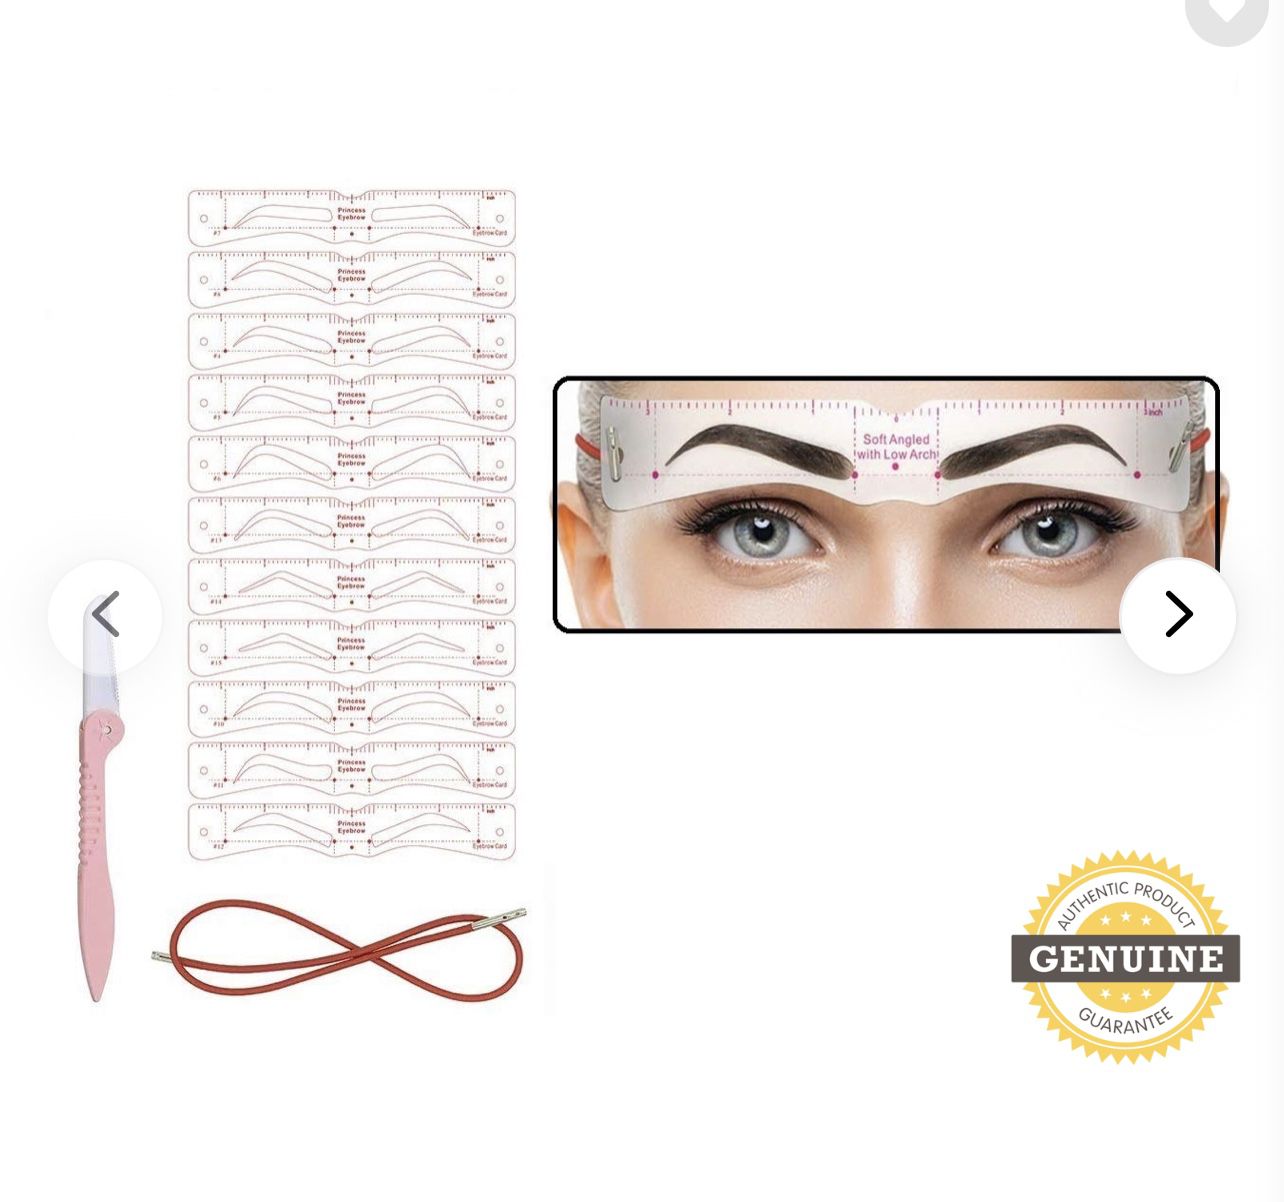 Eyebrow Stencil,11 Fashionable Styles Eyebrow Shaper Kit for Women Reusable Eyebrow Template 3 Minutes Makeup Tools for Eyebrows Great Gift